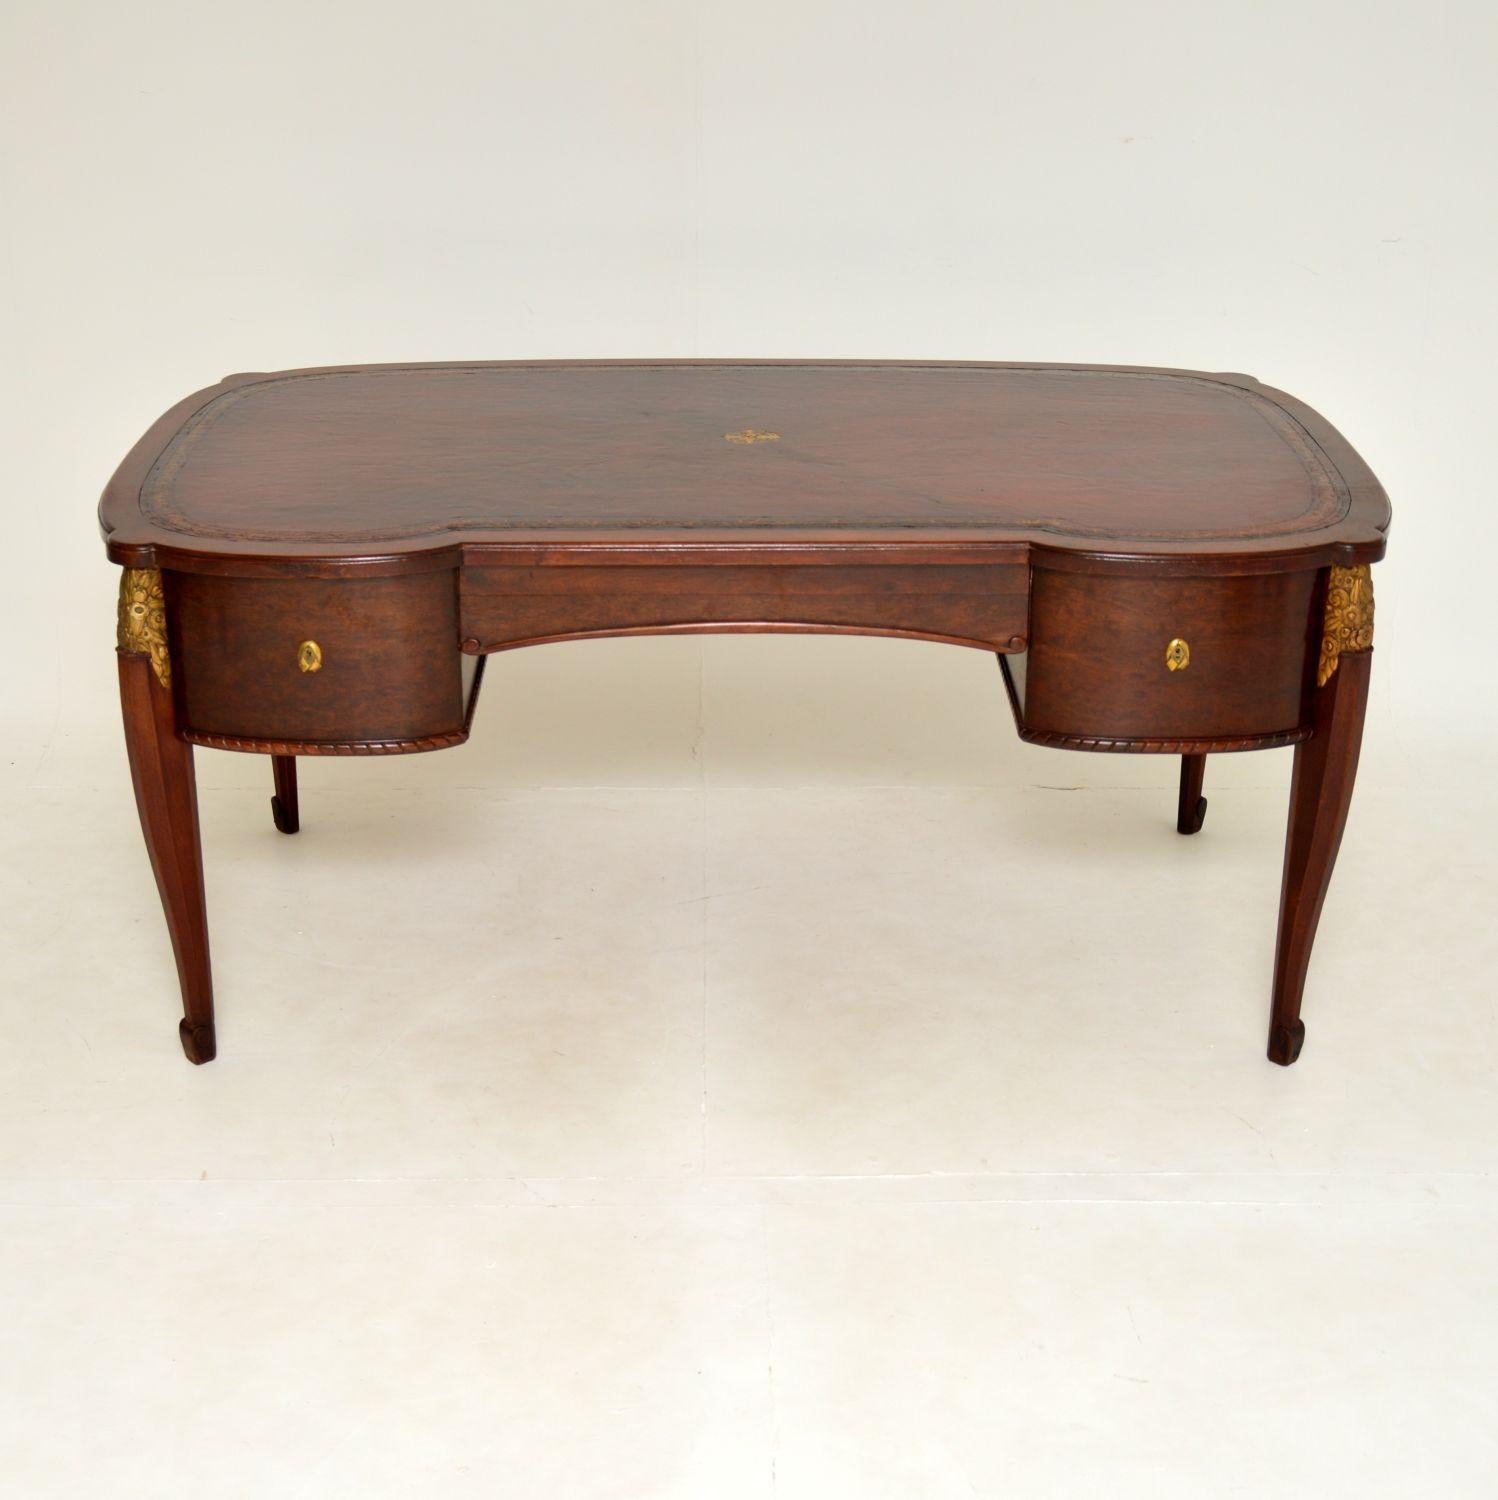 A magnificent and extremely beautiful antique French desk in wood, dating from around the 1860-1880’s period.
It is of amazing quality, plus very large and very impressive! This kidney shape design on such a large desk is very rare to see.
It has